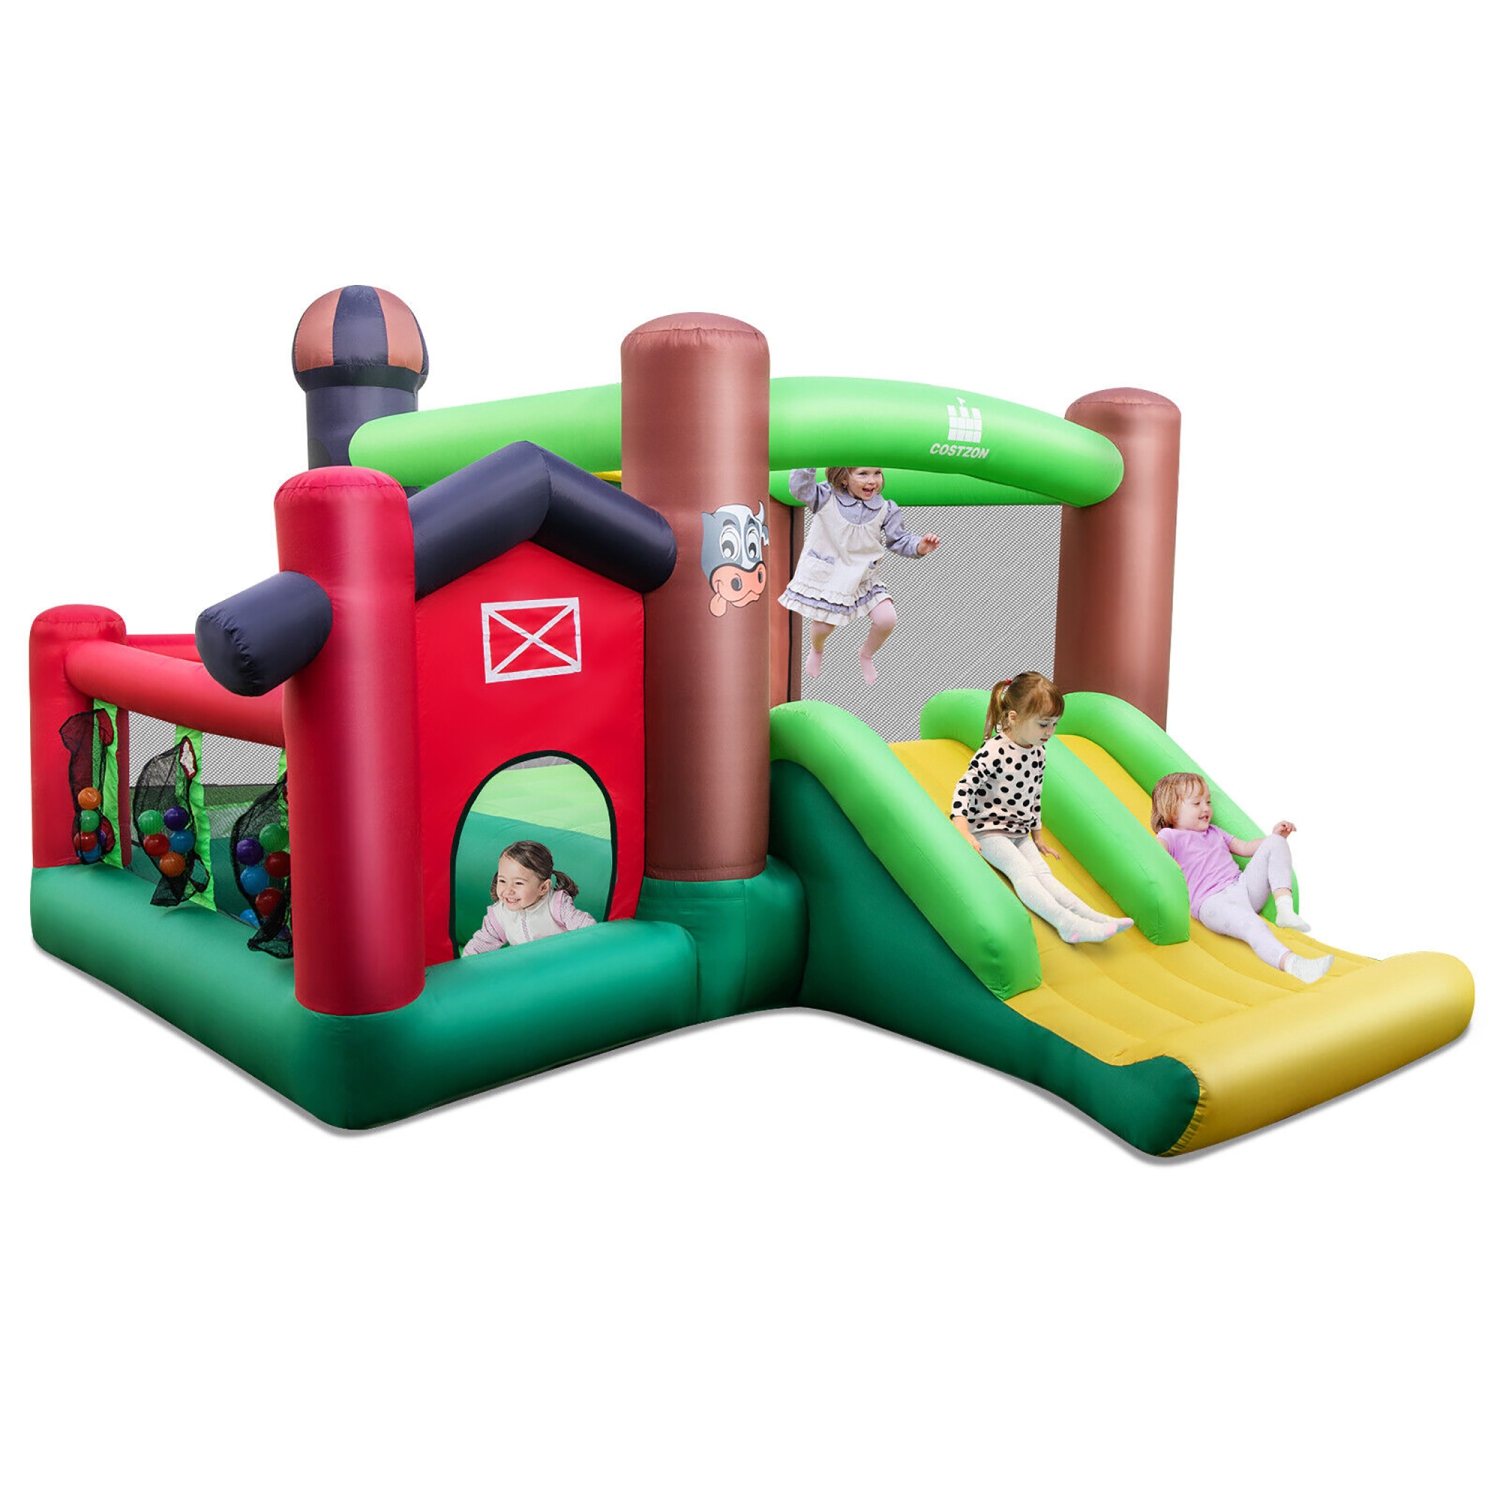 Costway Farm Themed Inflatable Castle Kids Bounce House w/ Double Slides Blower Excluded